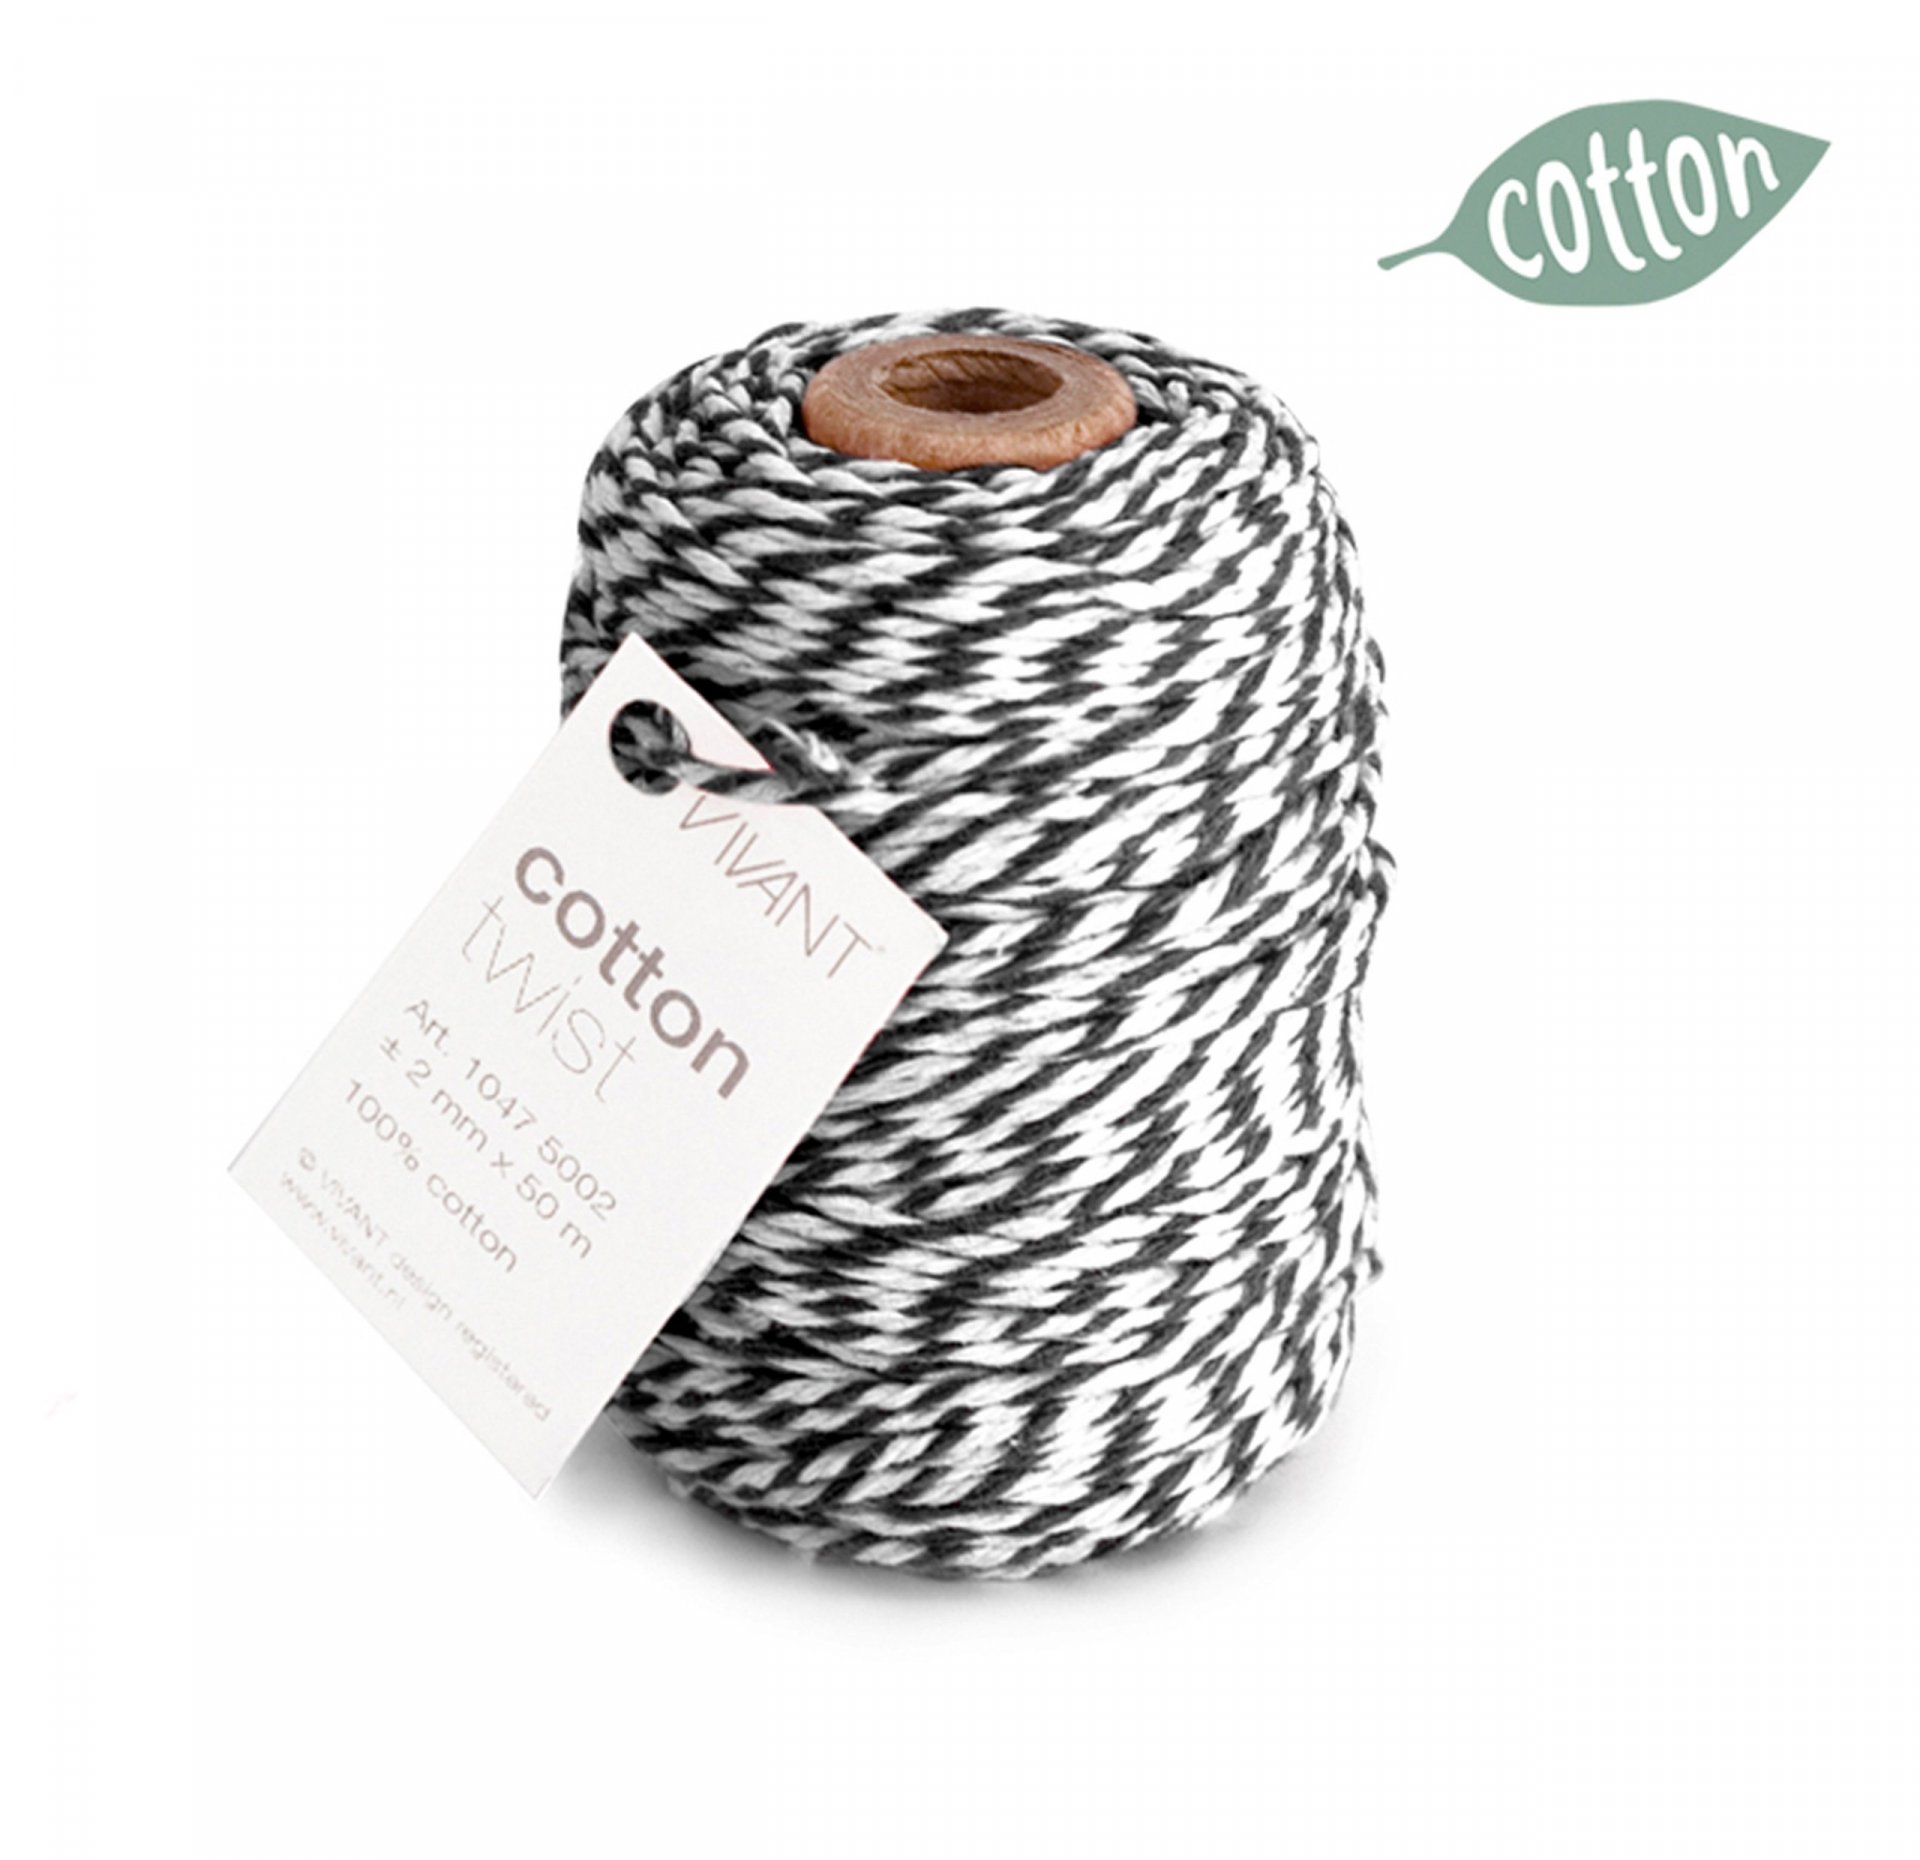 Buy Cotton Twist cotton cord, two-toned online at Modulor